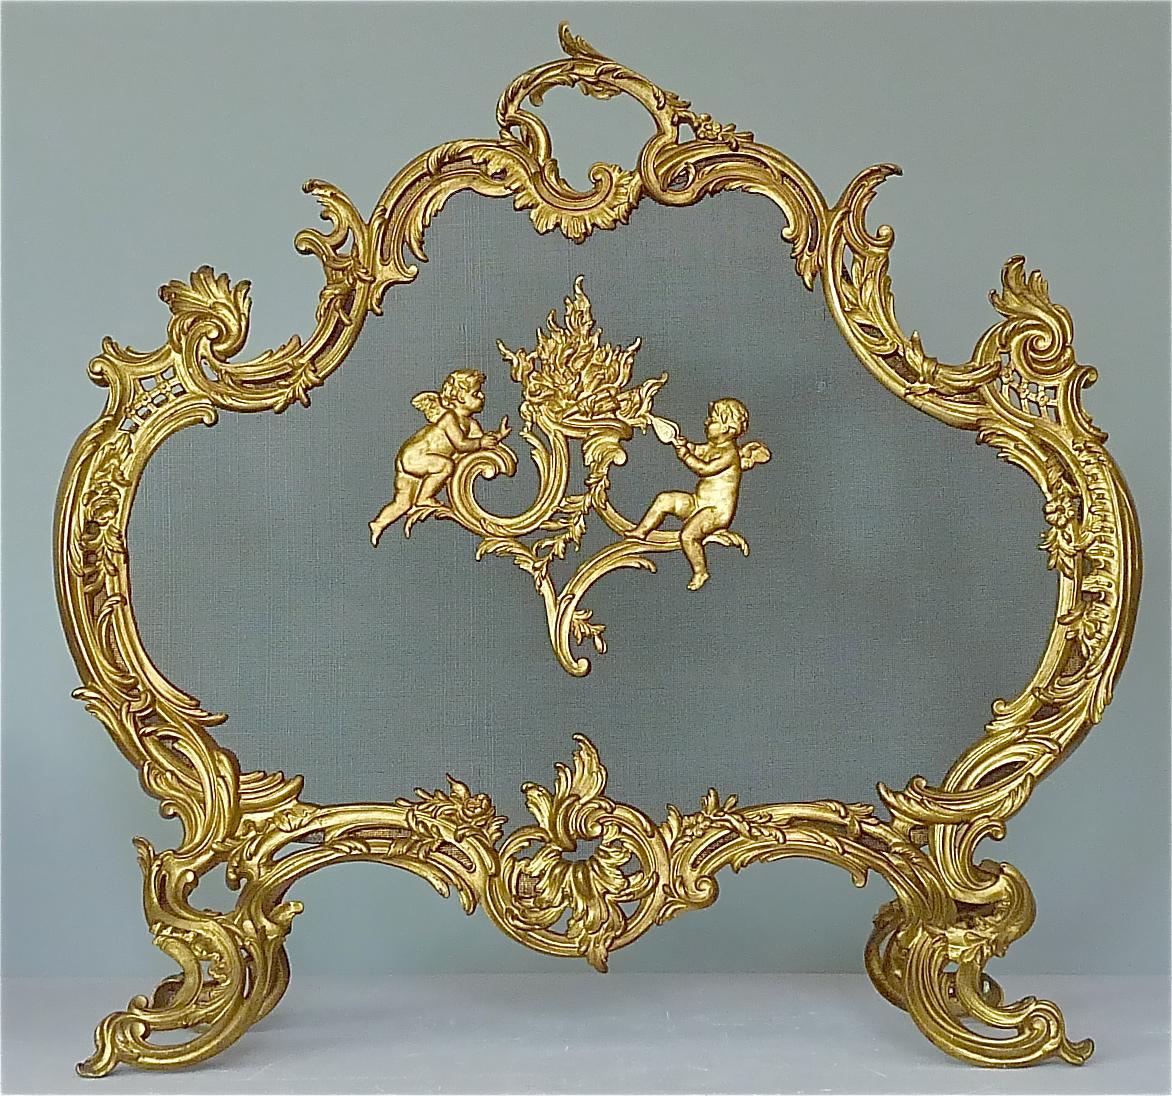 Antique French Gilt Bronze Fire Place Screen 19th Century Cherub Louis XV Style For Sale 17